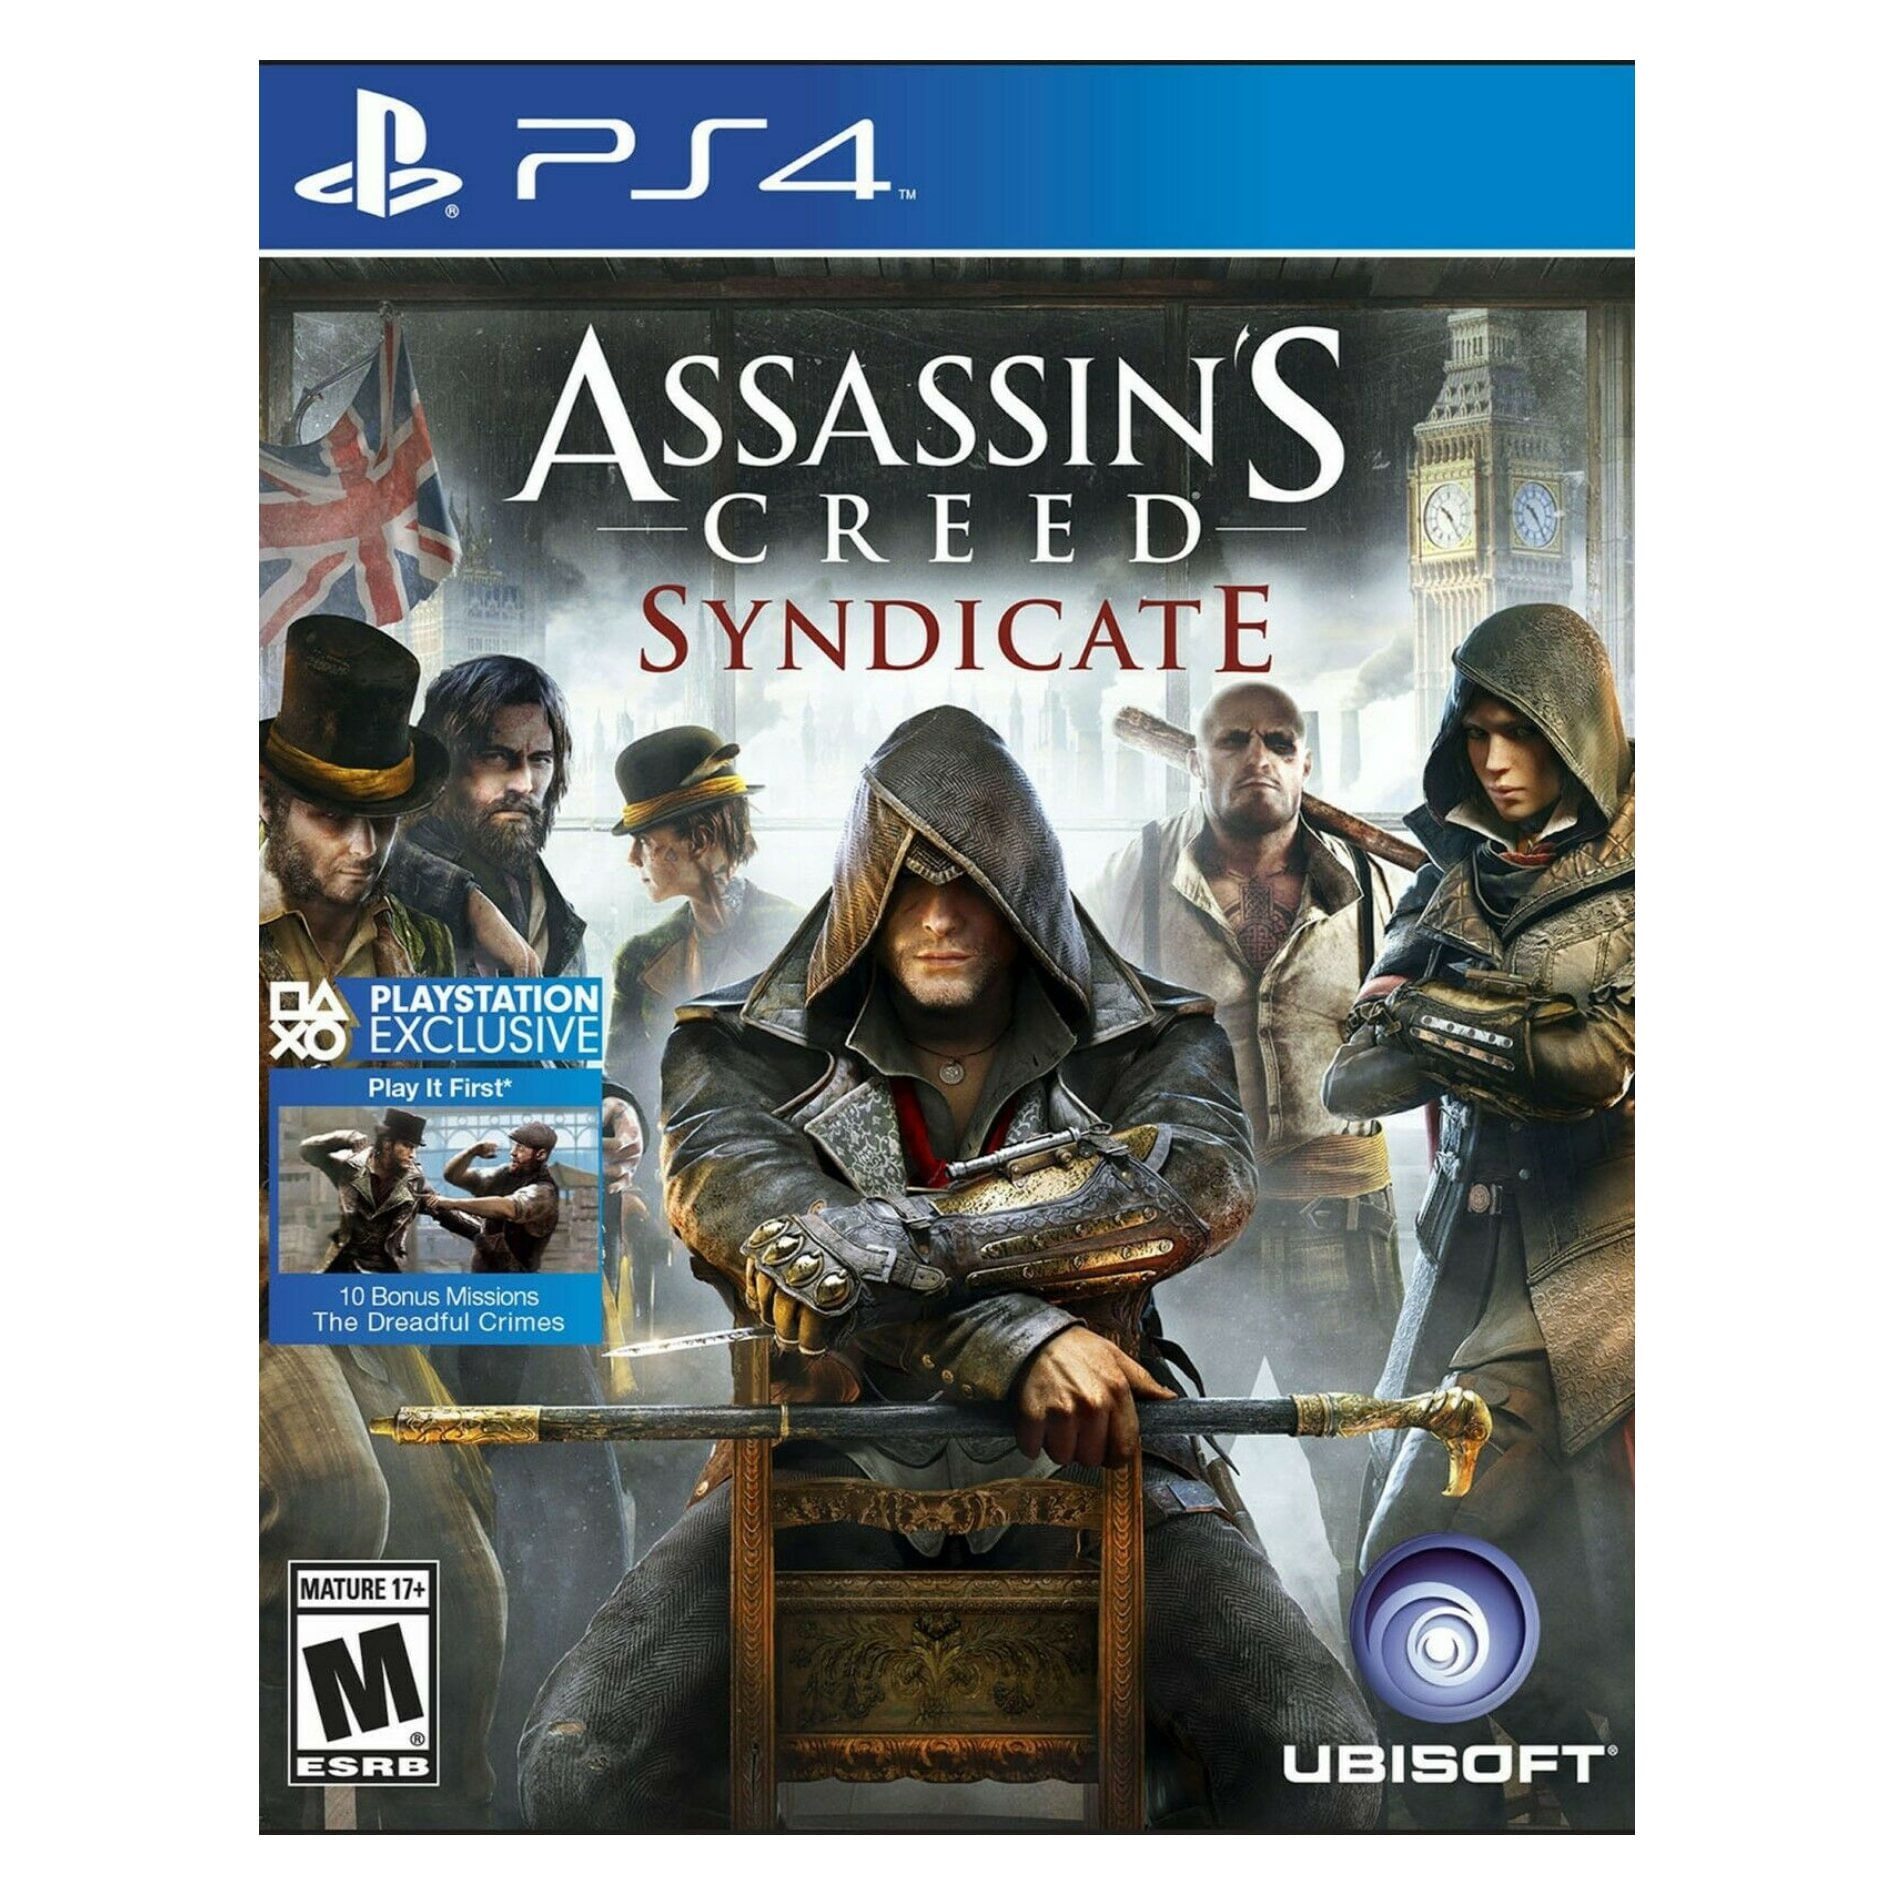 Juego Ps4 Assassins Creed Syndicate